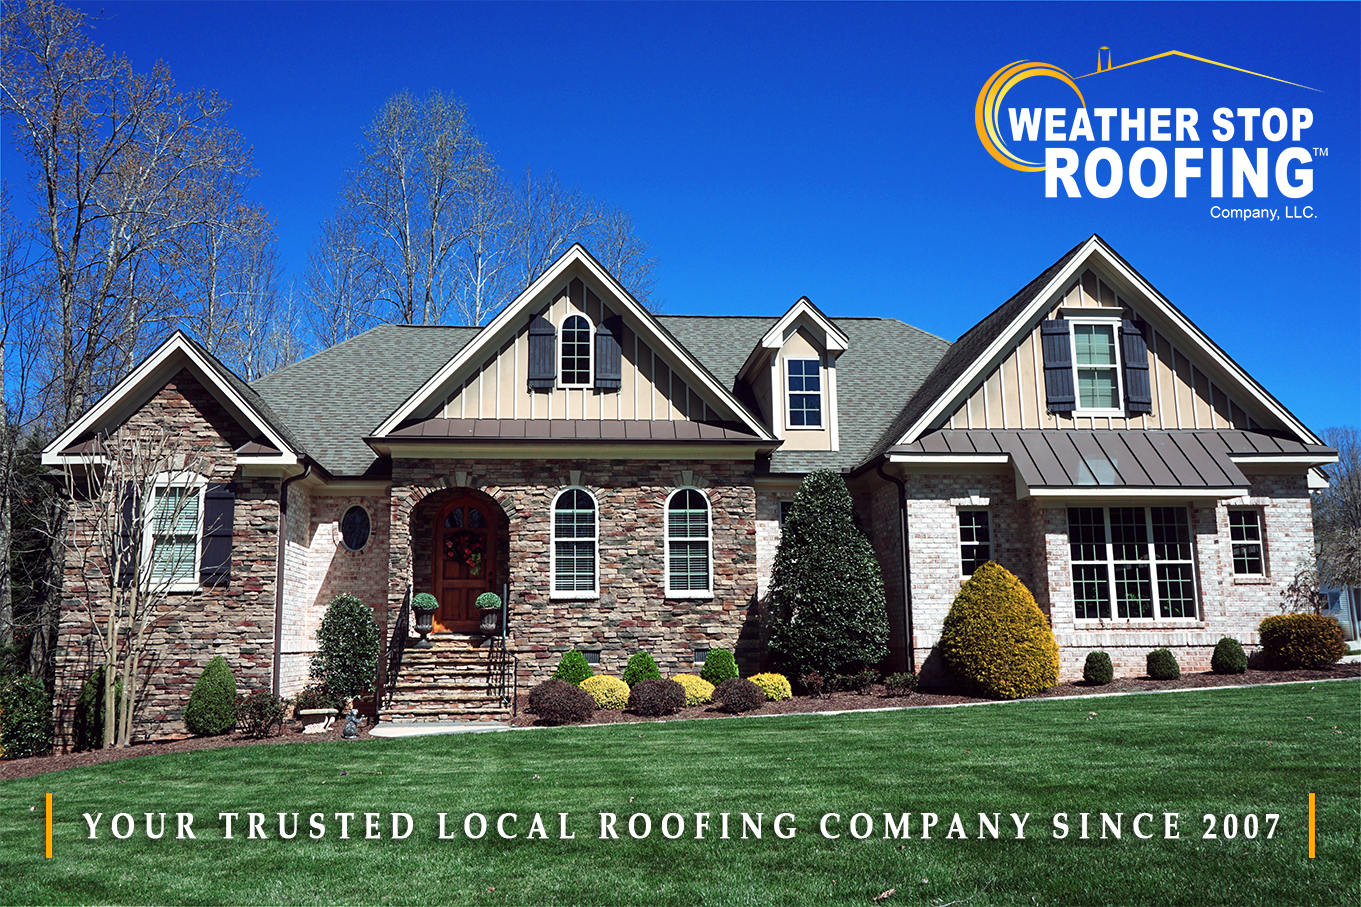 About Weather Stop Roofing - Your Trusted Local Roofing Company